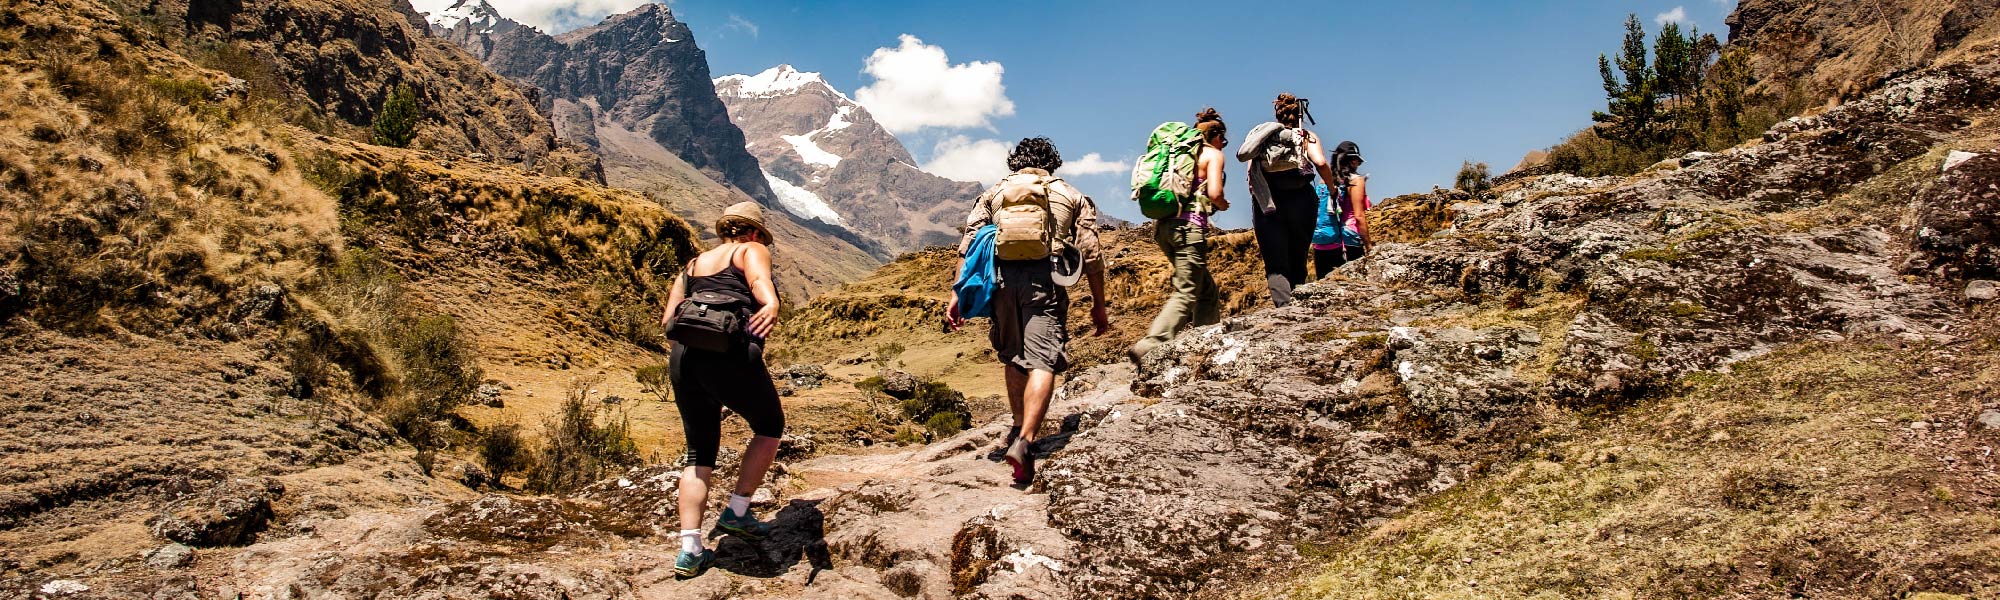 Lares Trail Peru & 2D Inca Trail with Camping 5 Days 4 Nights